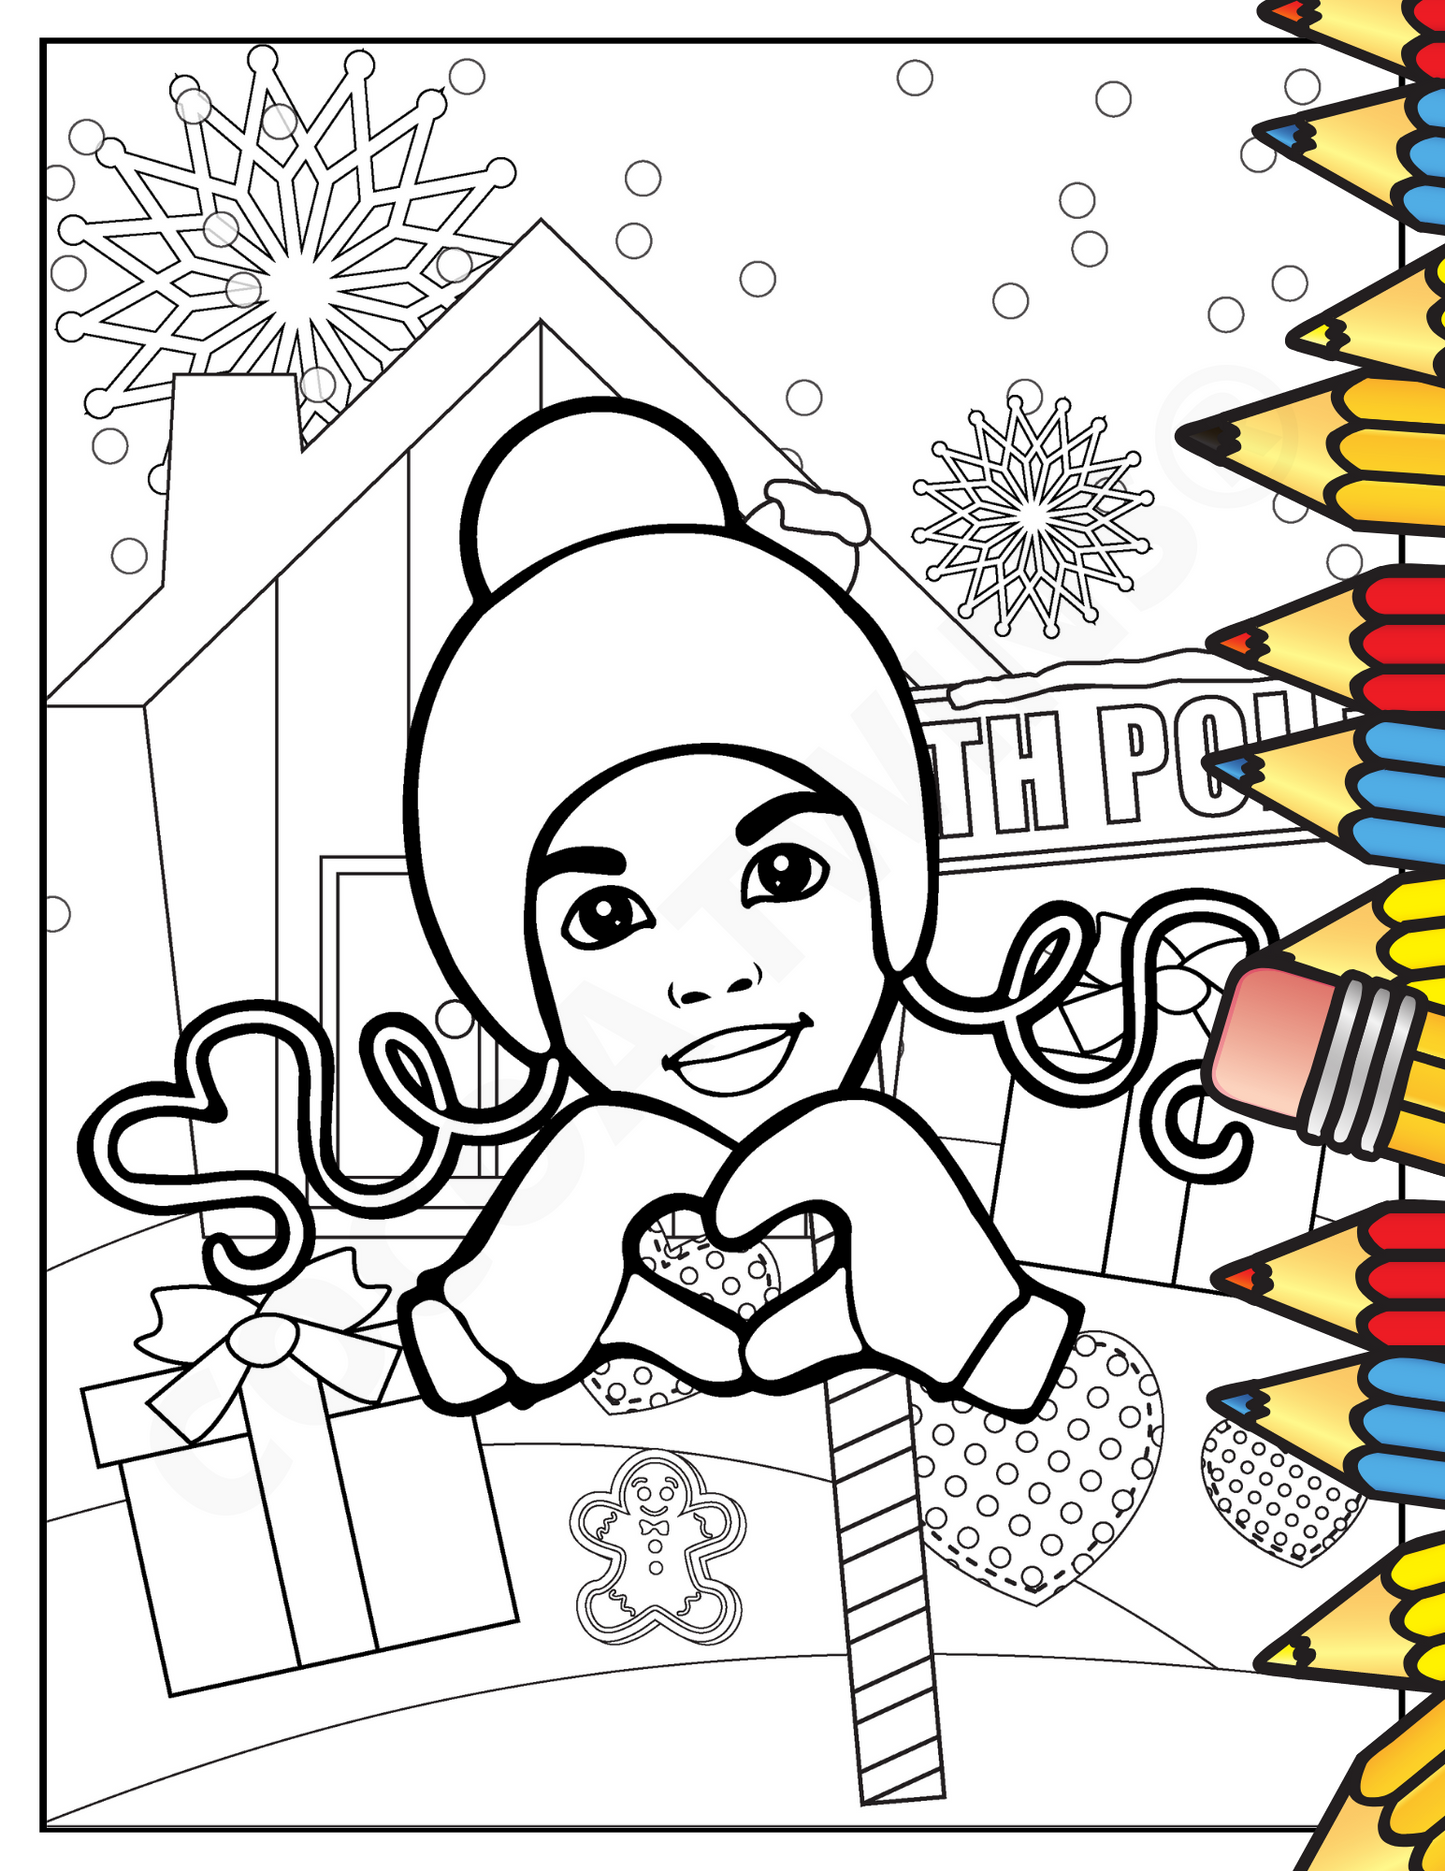 Printable Coloring Page | Holiday Heart Hands | 1120214